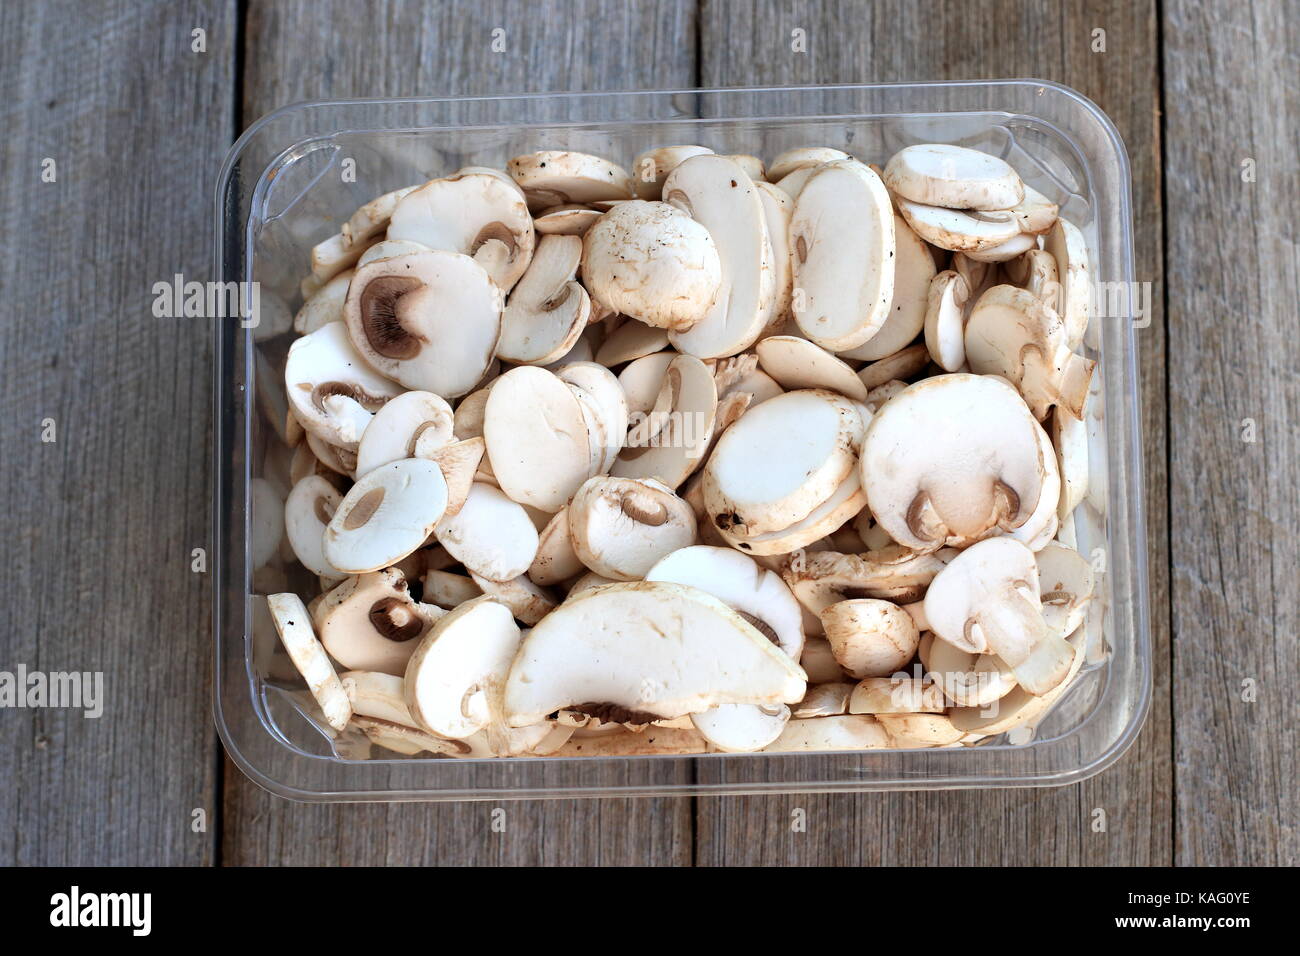 Close up of Sliced Agaricus bisporus or known as White Button Mushrooms against wooden background Stock Photo